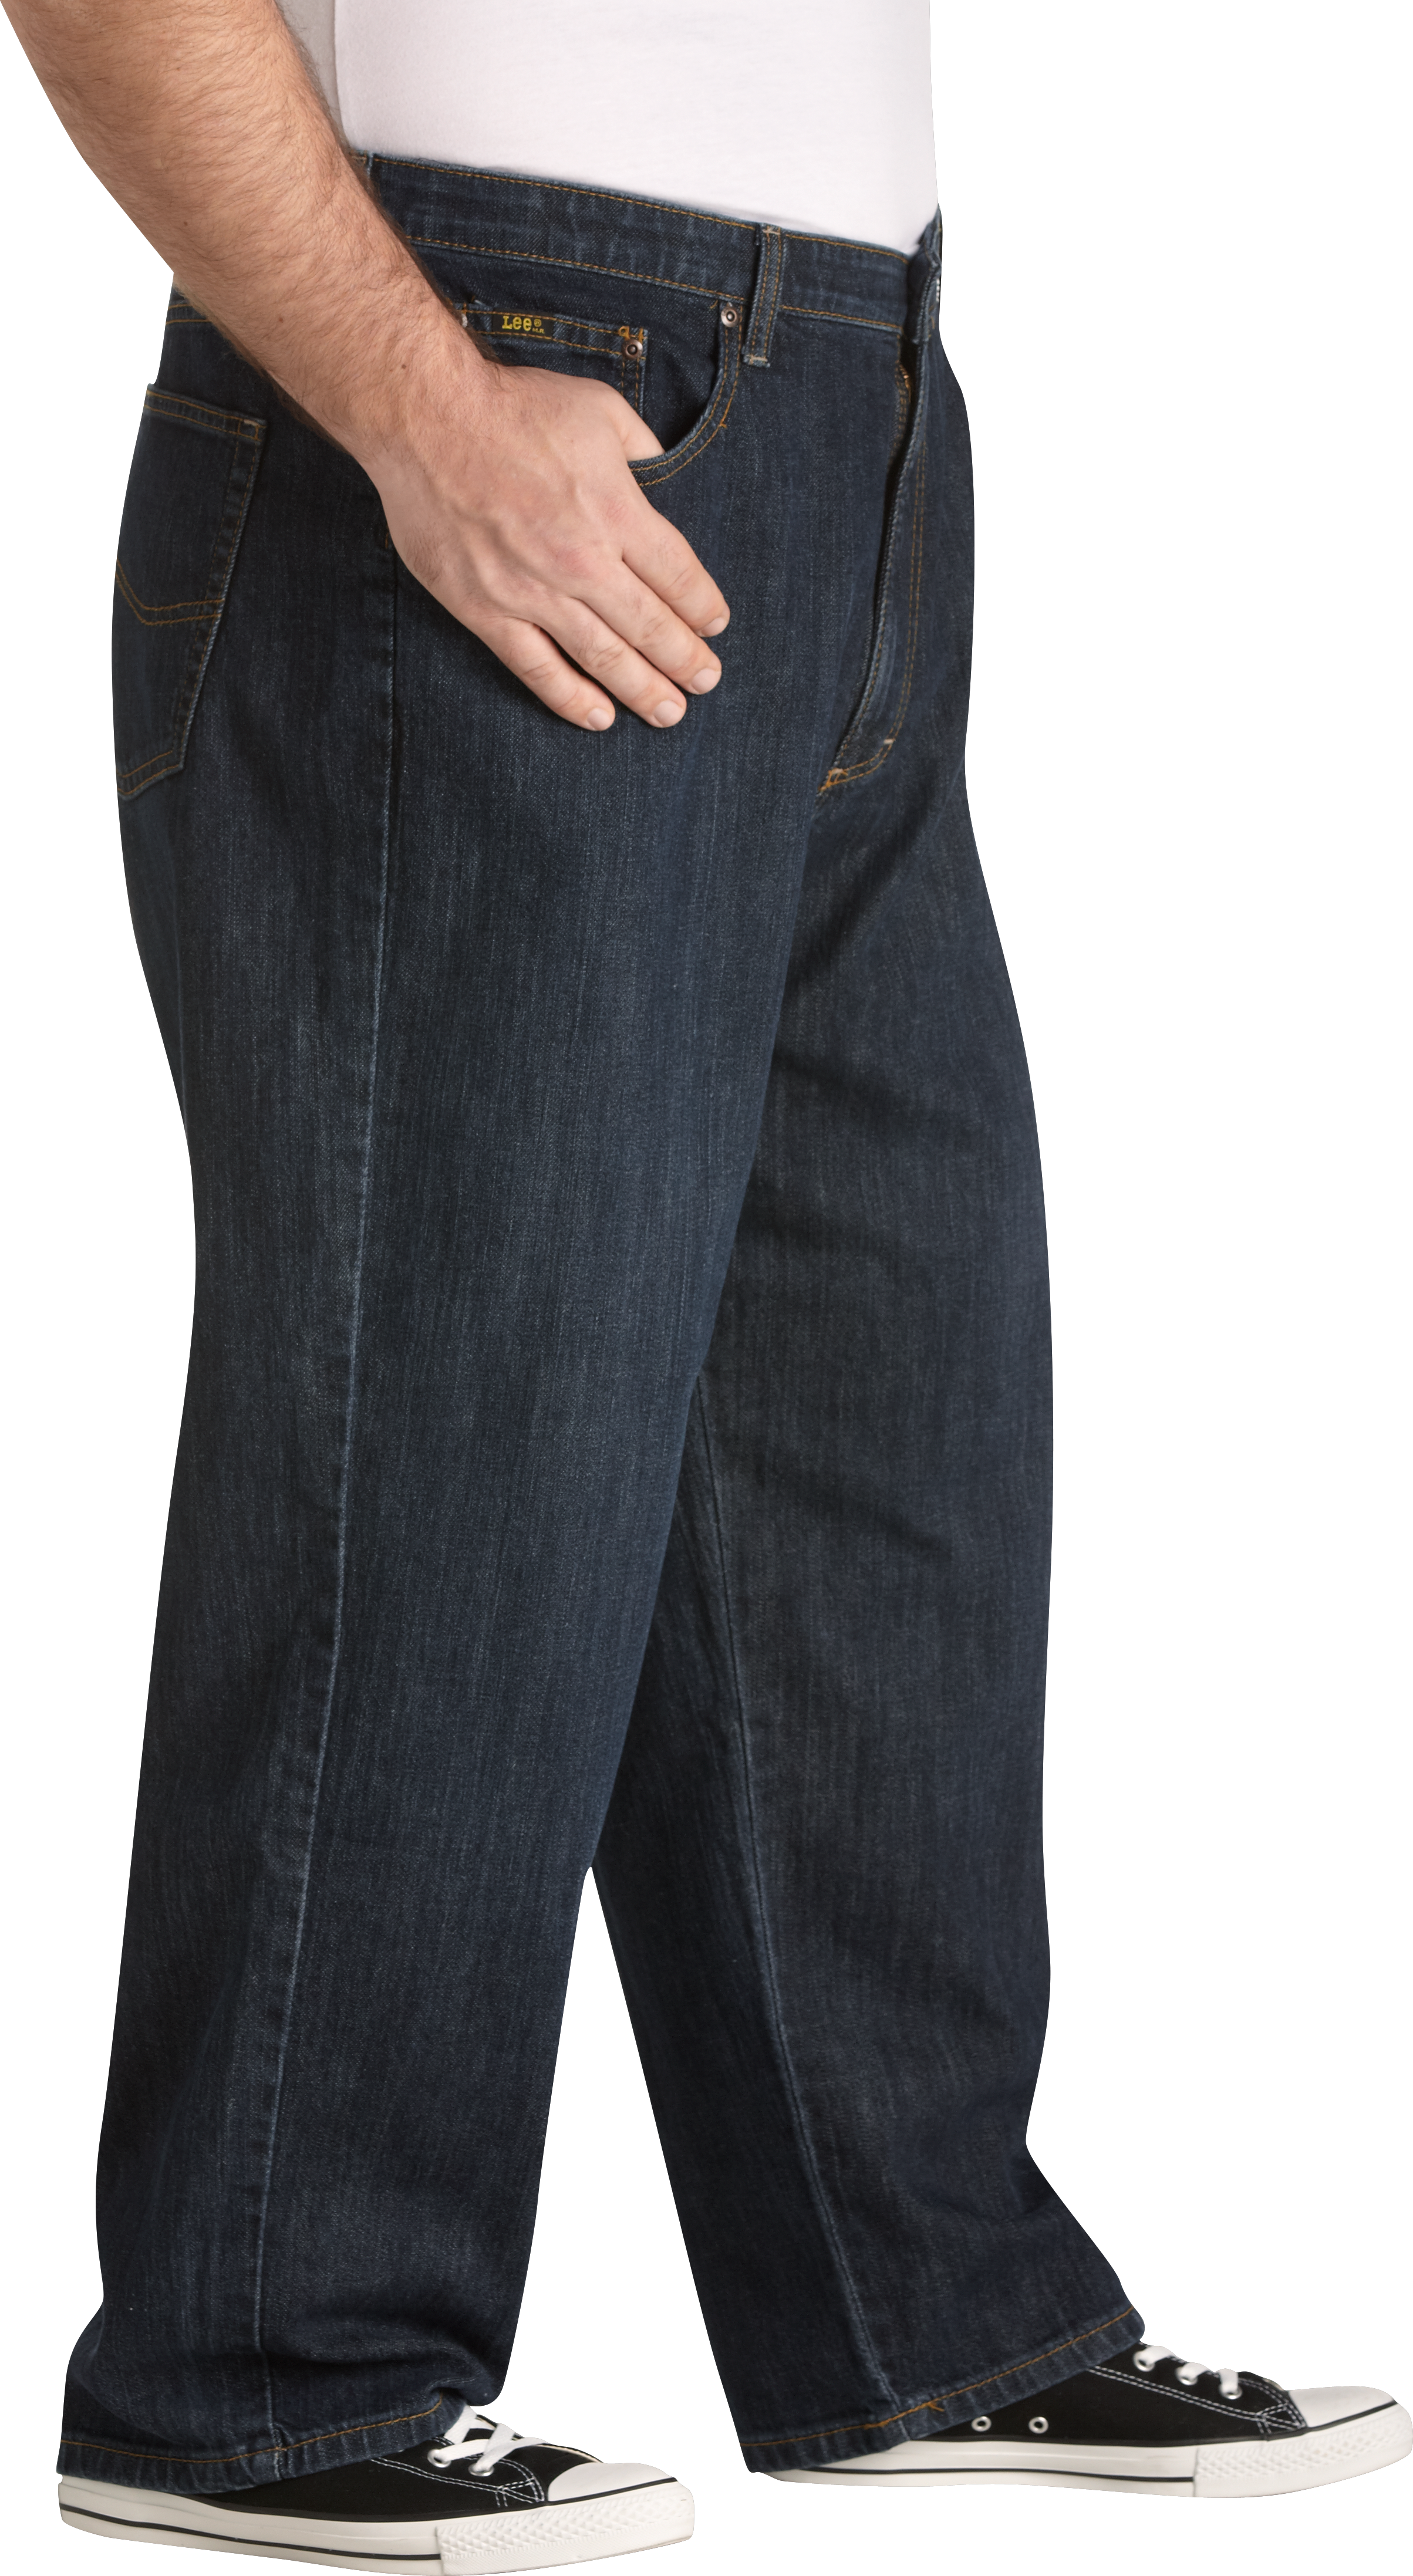 Lee Blue Dark Wash Relaxed Fit Jeans - Men's Big & Tall | Men's Wearhouse